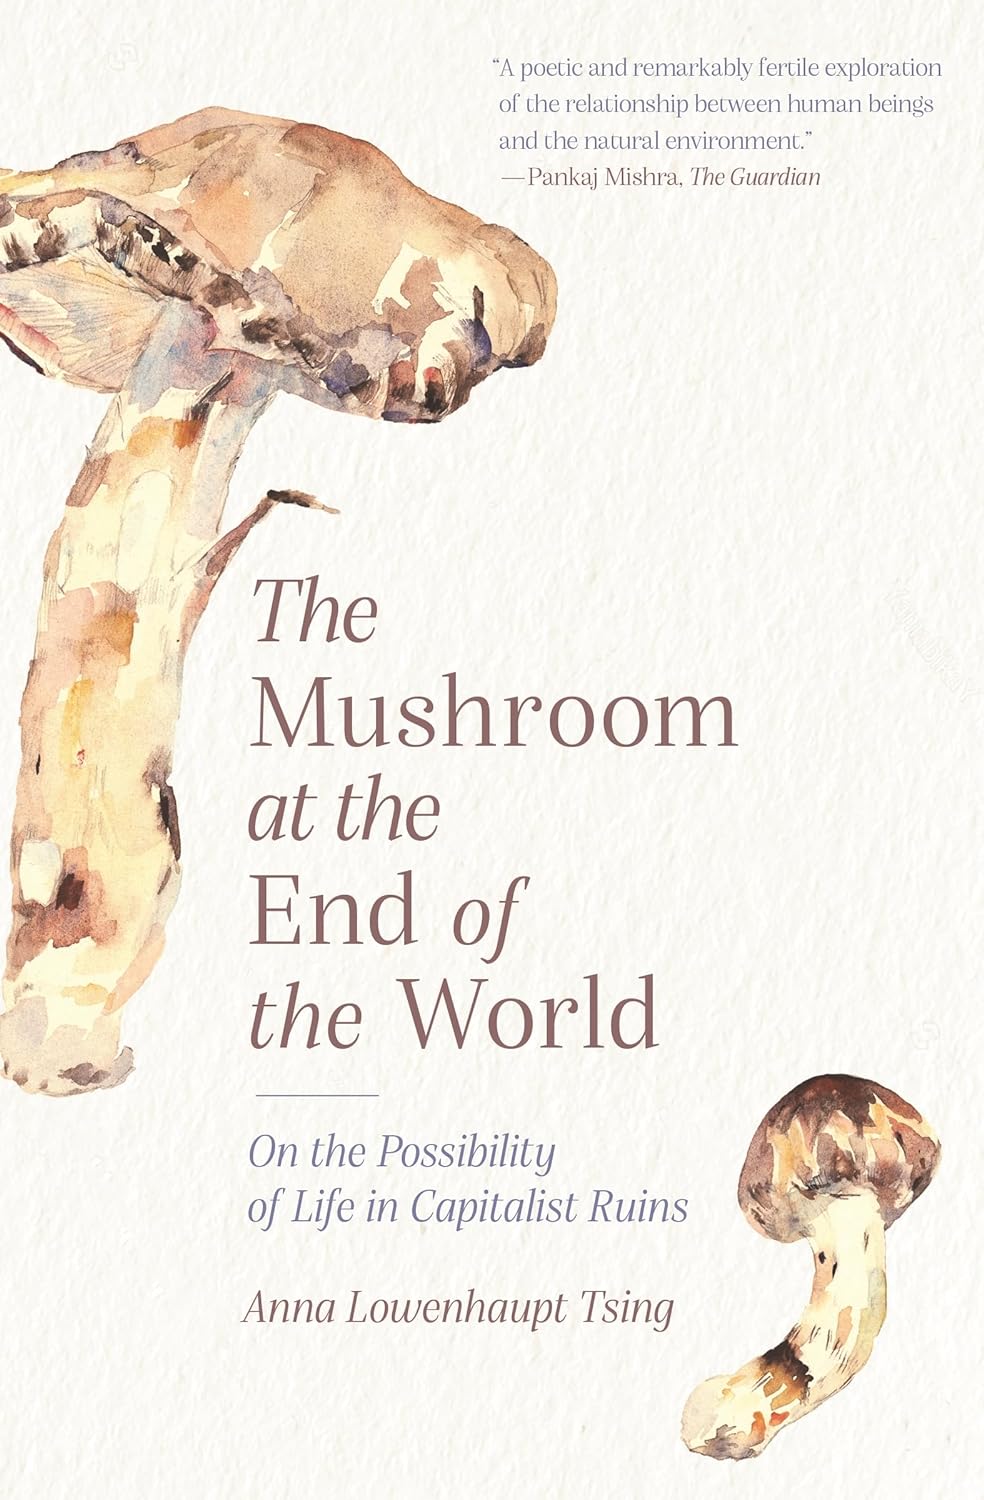 Anna Lowenhaupt Tsing: The Mushroom at the End of the World (2015)